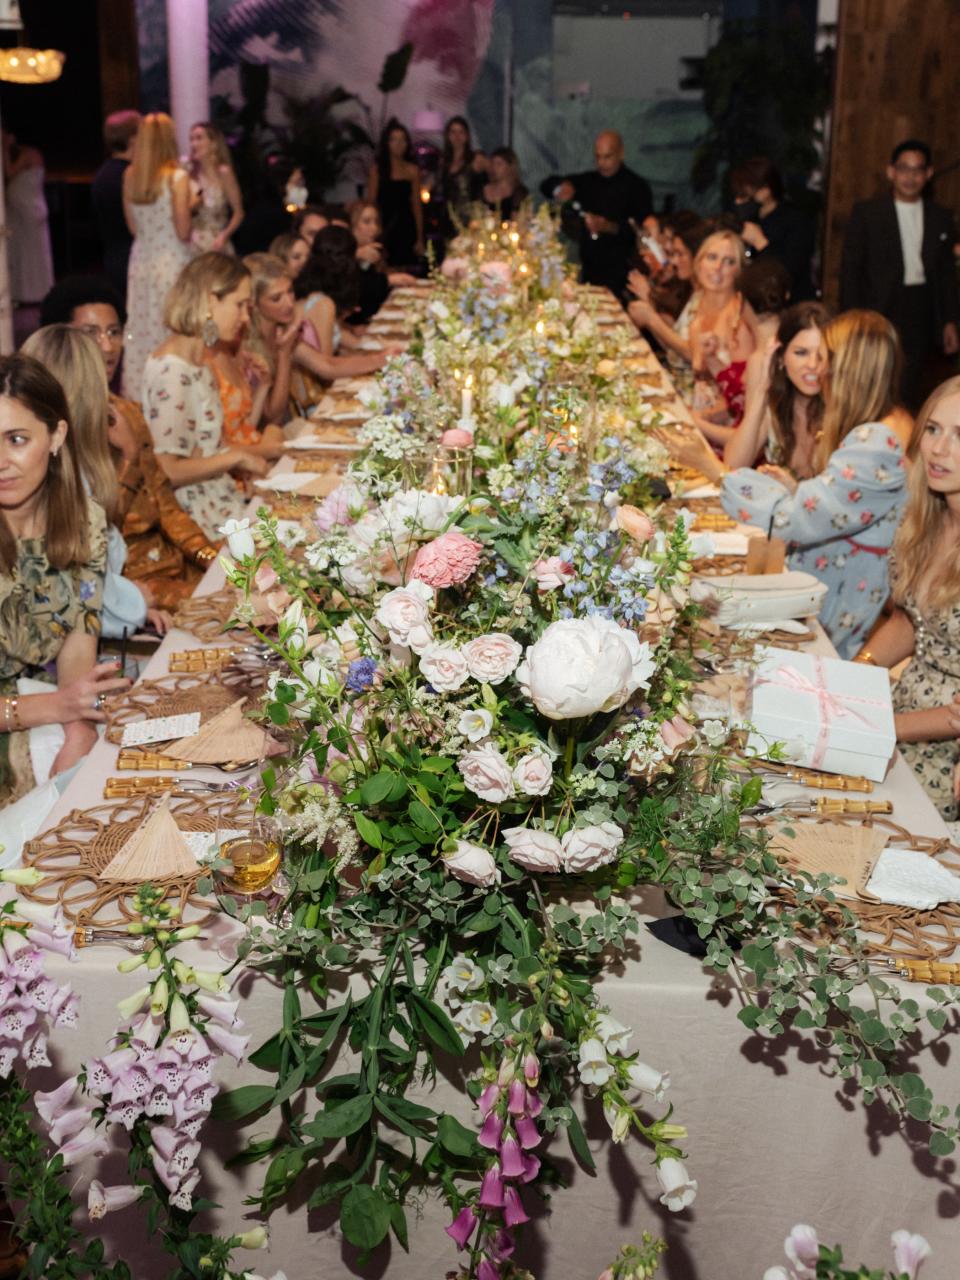 CeCe Barfield Thompson Launched a Collection of Heirloom-Worthy Tabletop and All the Girls Came Out